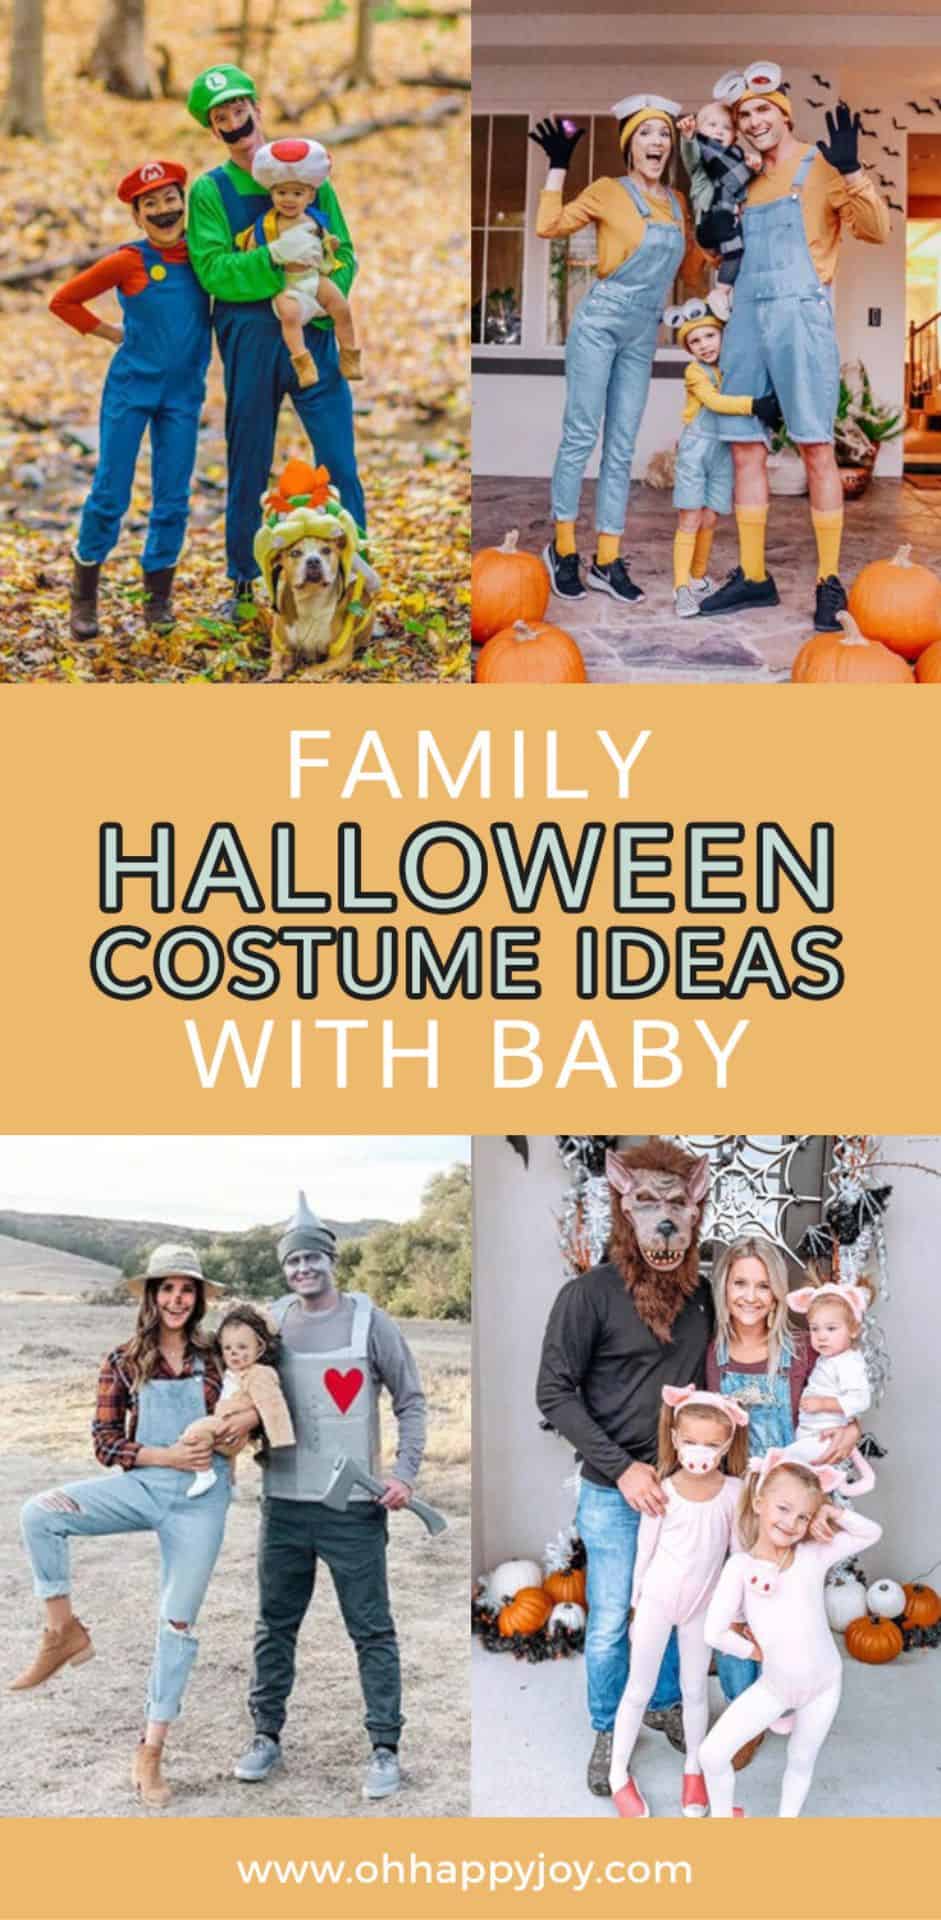 FAMILY HALLOWEEN COSTUMES WITH BABY